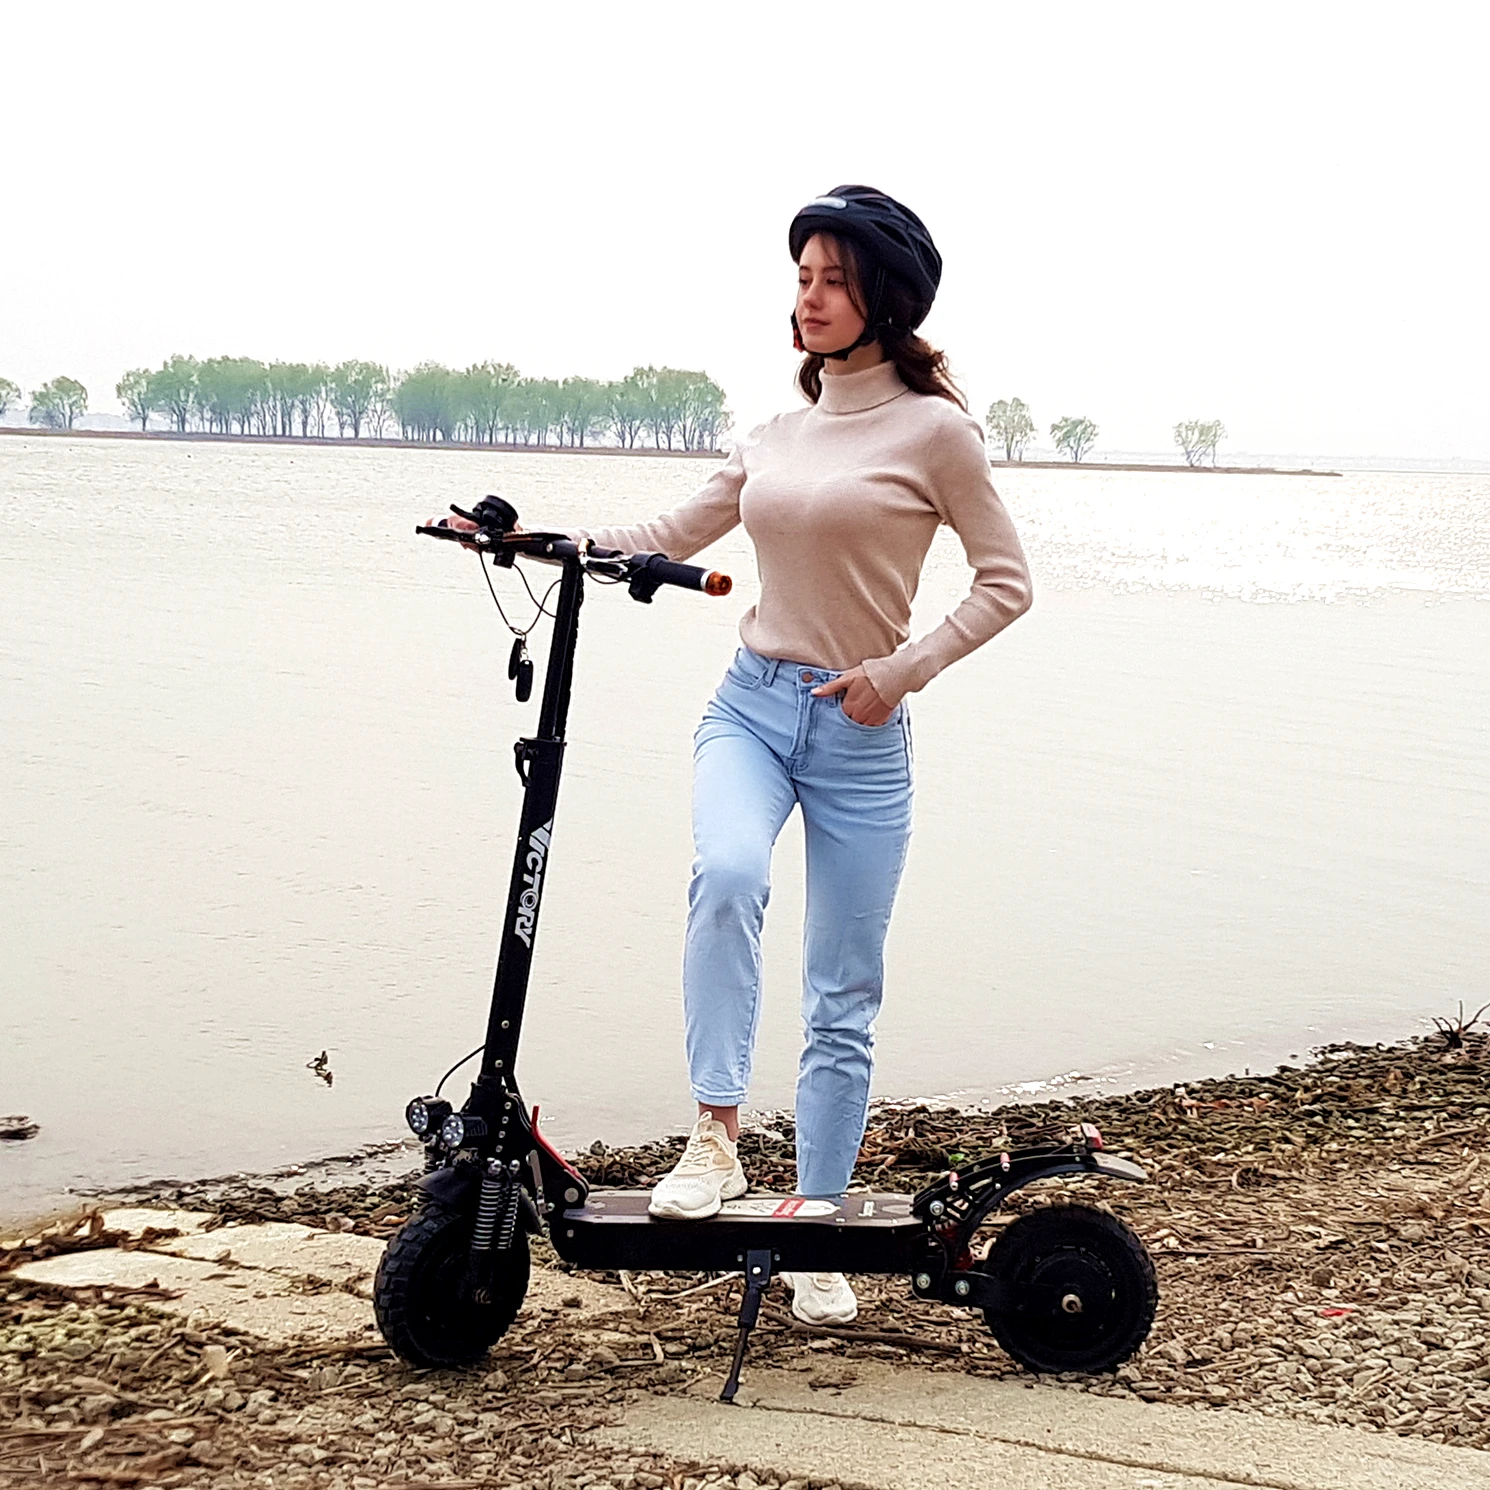 

GET 1 FREE 1 Victory kugoo g2 pro 2000w 52v 50kph cheap price electric scooter removable seat turning lights escooter for sale